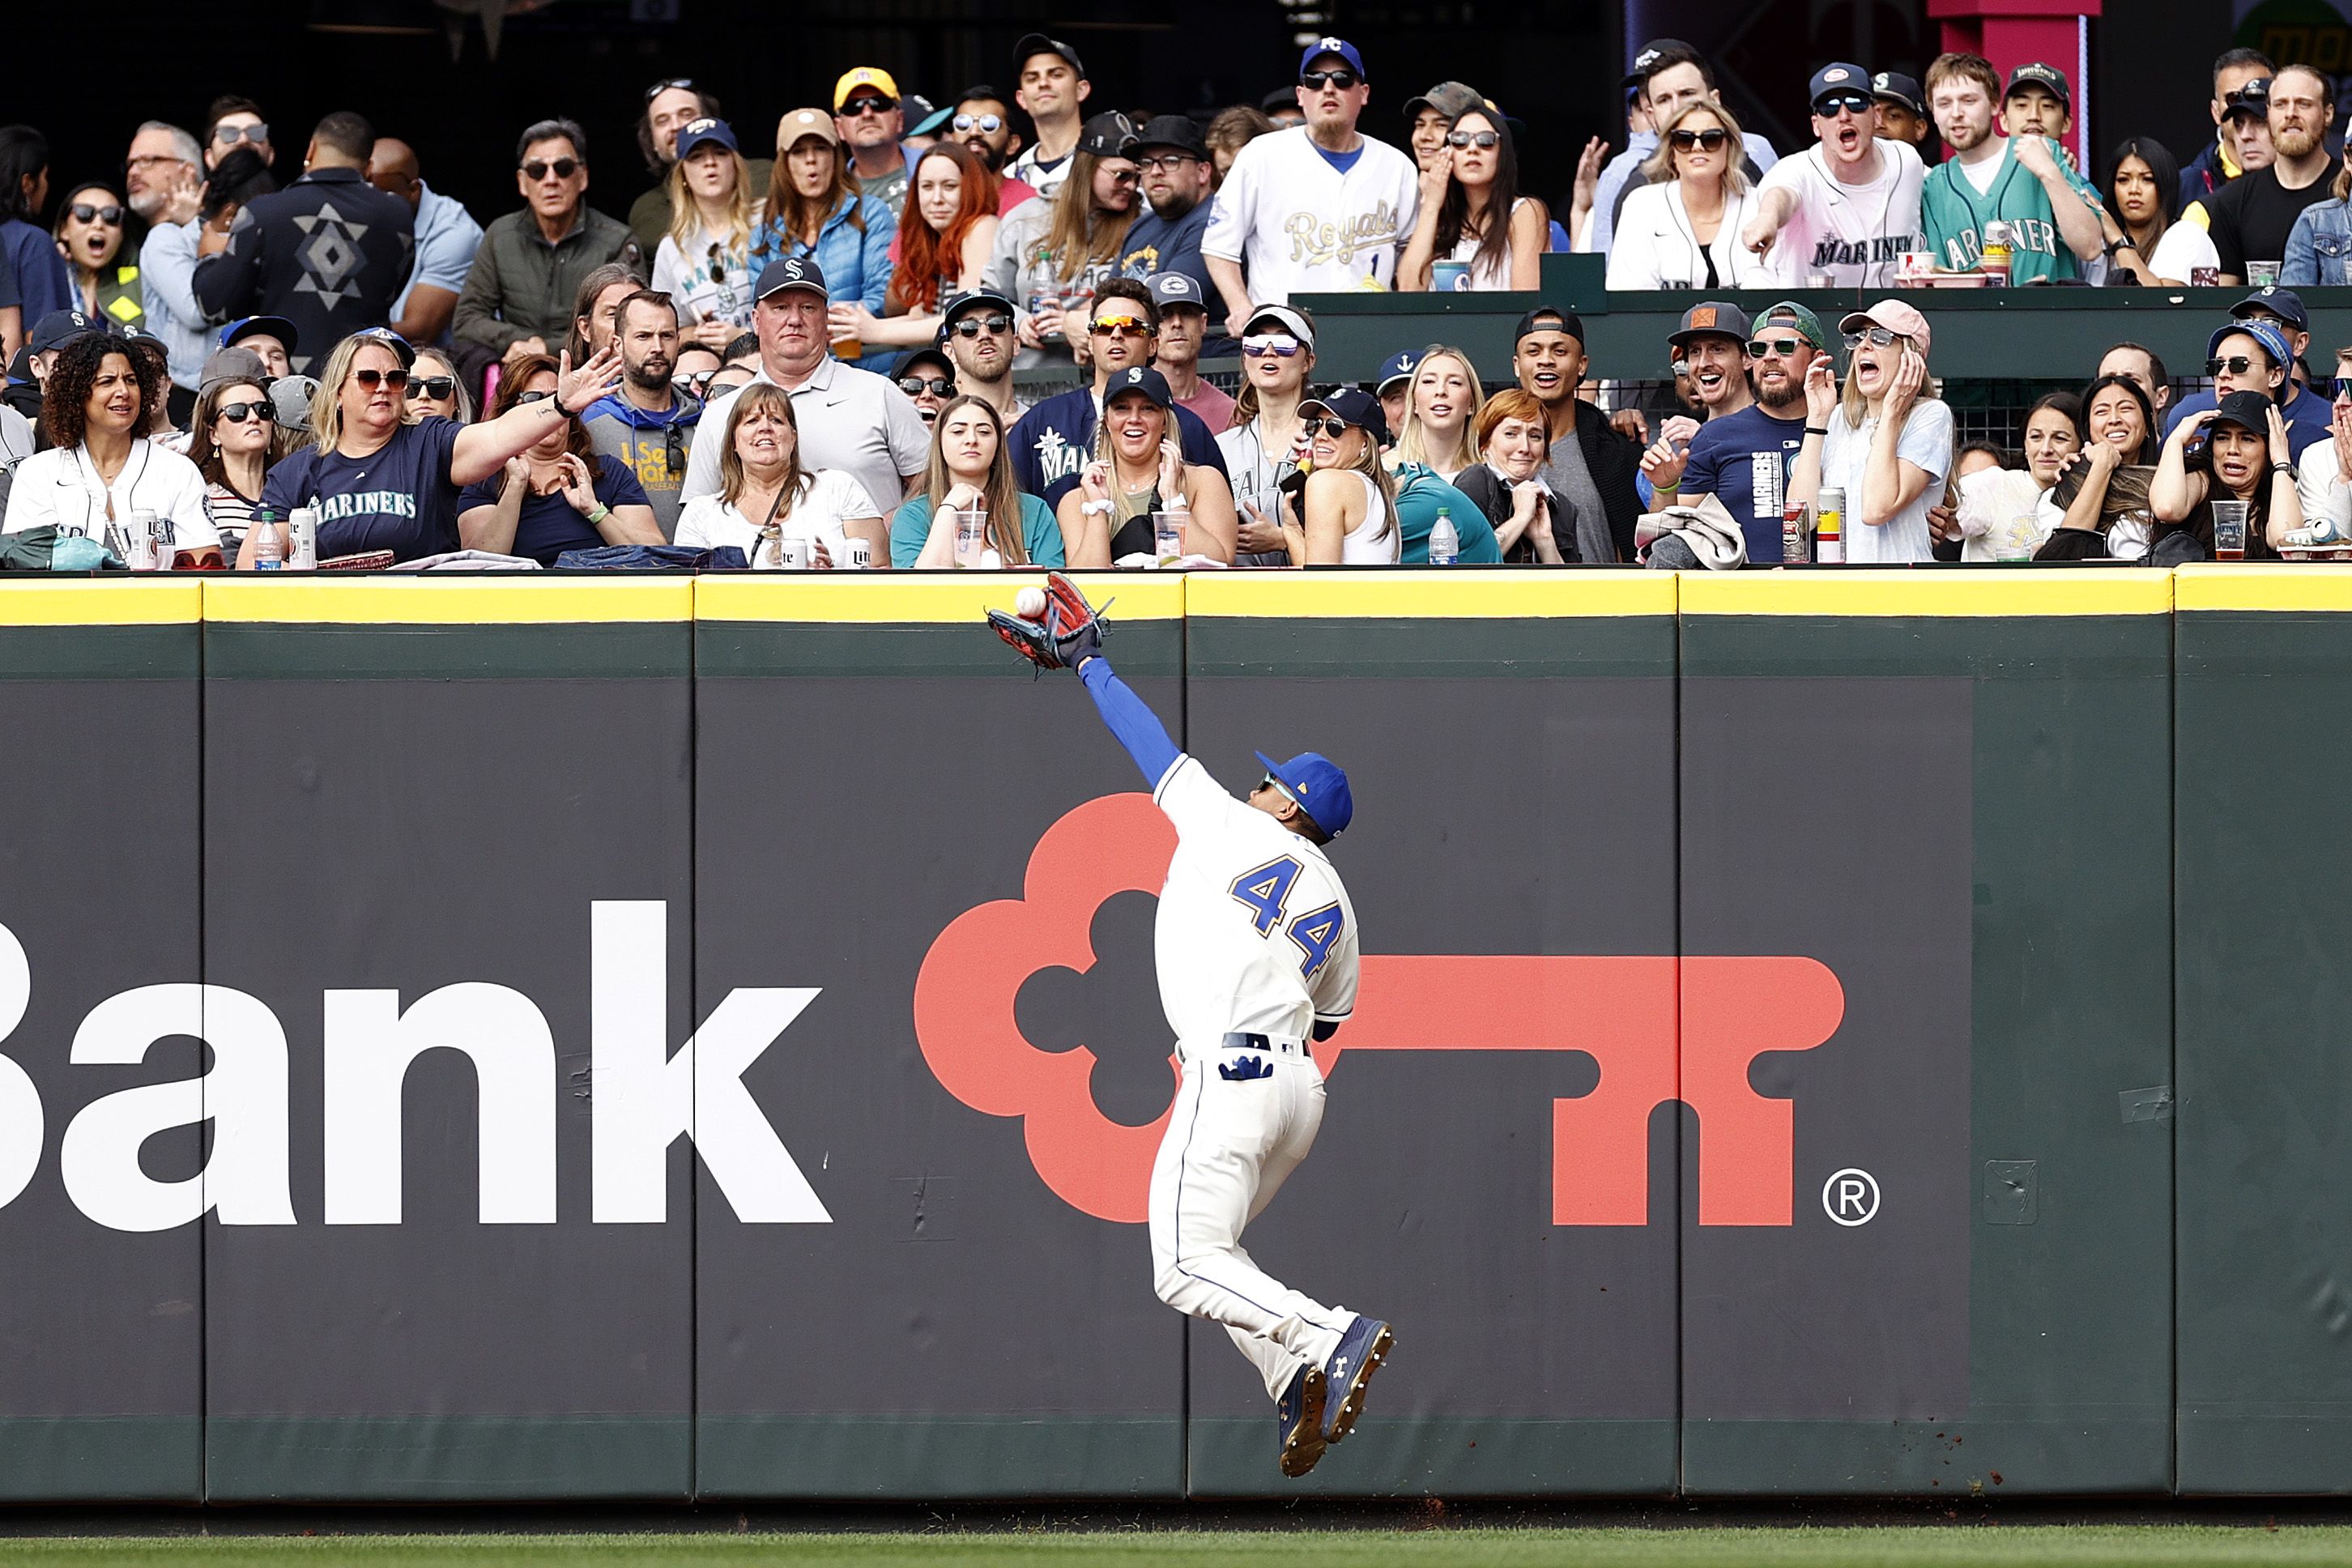 A Seattle Mariners player makes a catch in front of a crowd of fans